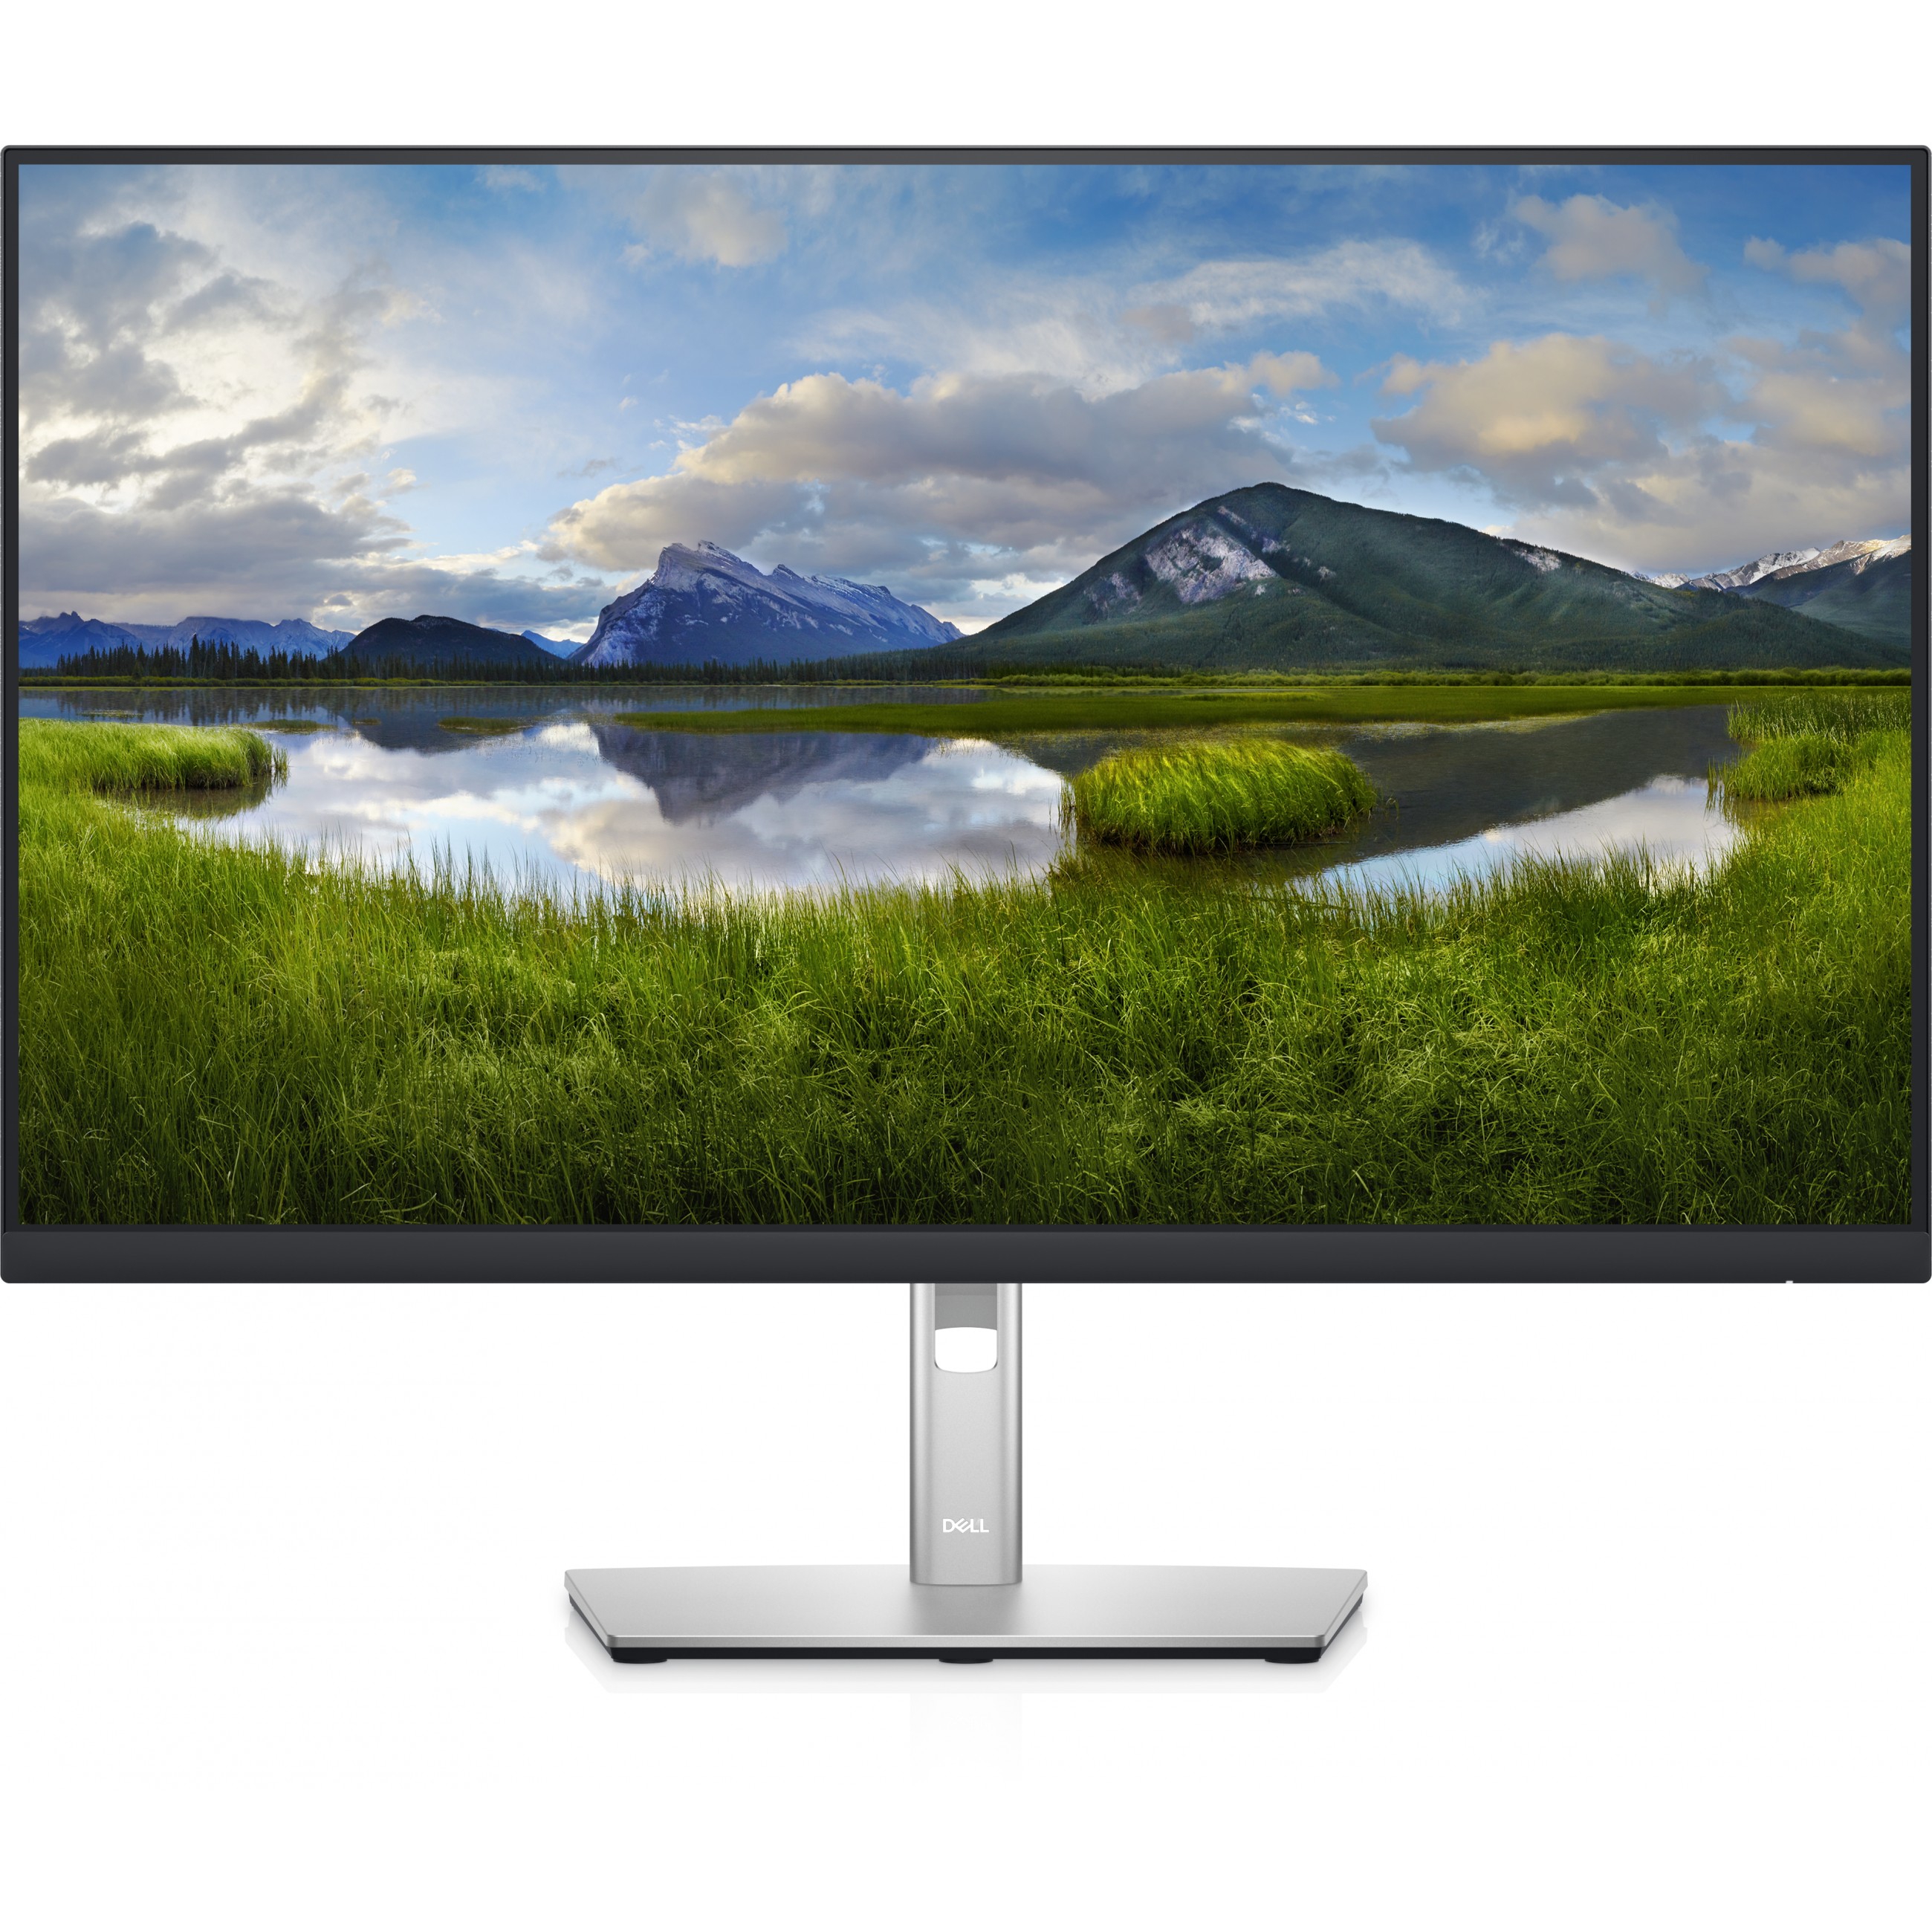 DELL P Series P2722H LED display - DELL-P2722H